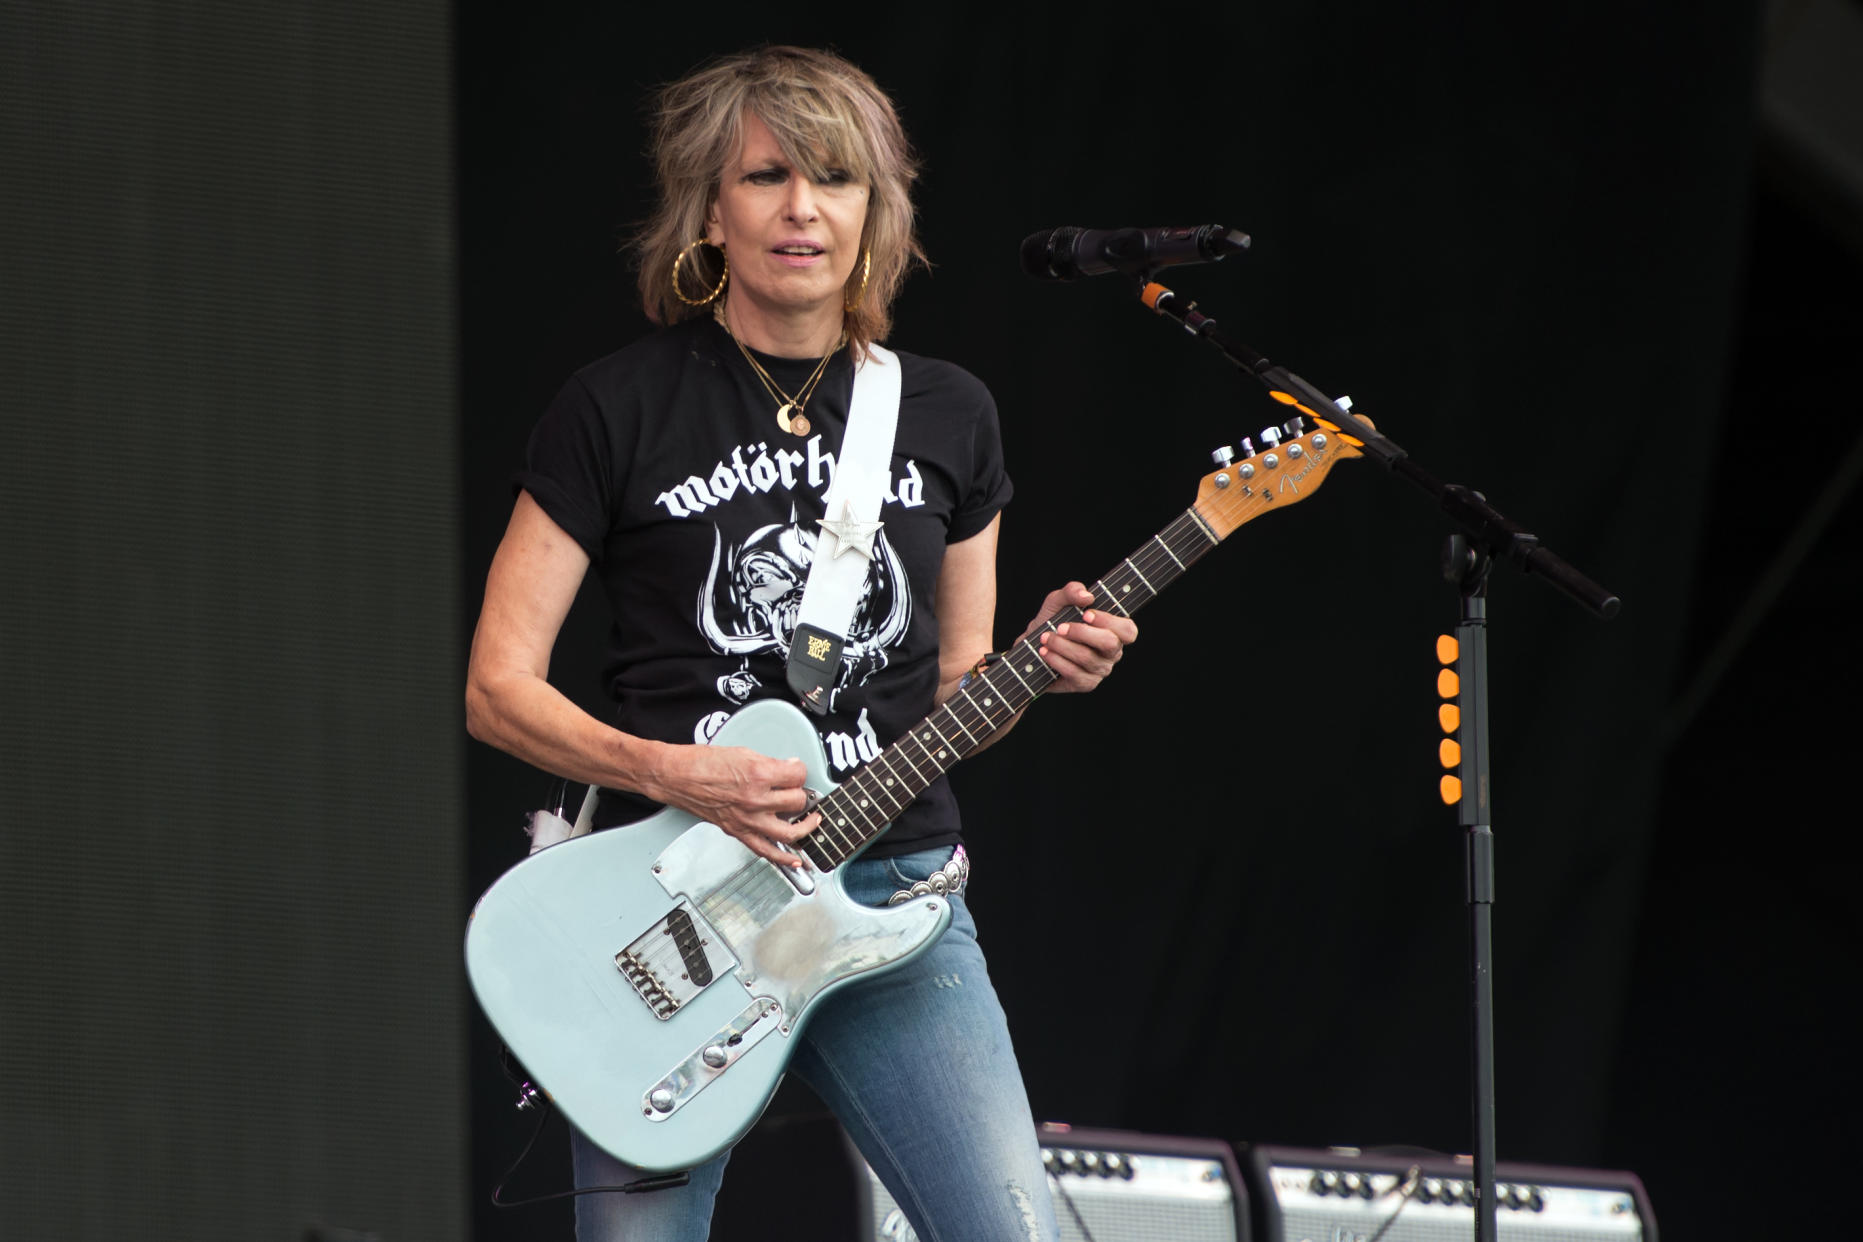 Chrissie Hynde, of The Pretenders, performs on the Other Stage at the Glastonbury Festival of Music and Performing Arts on Worthy Farm near the village of Pilton in Somerset, south-west England on June 23, 2017. / AFP PHOTO / OLI SCARFF        (Photo credit should read OLI SCARFF/AFP via Getty Images)